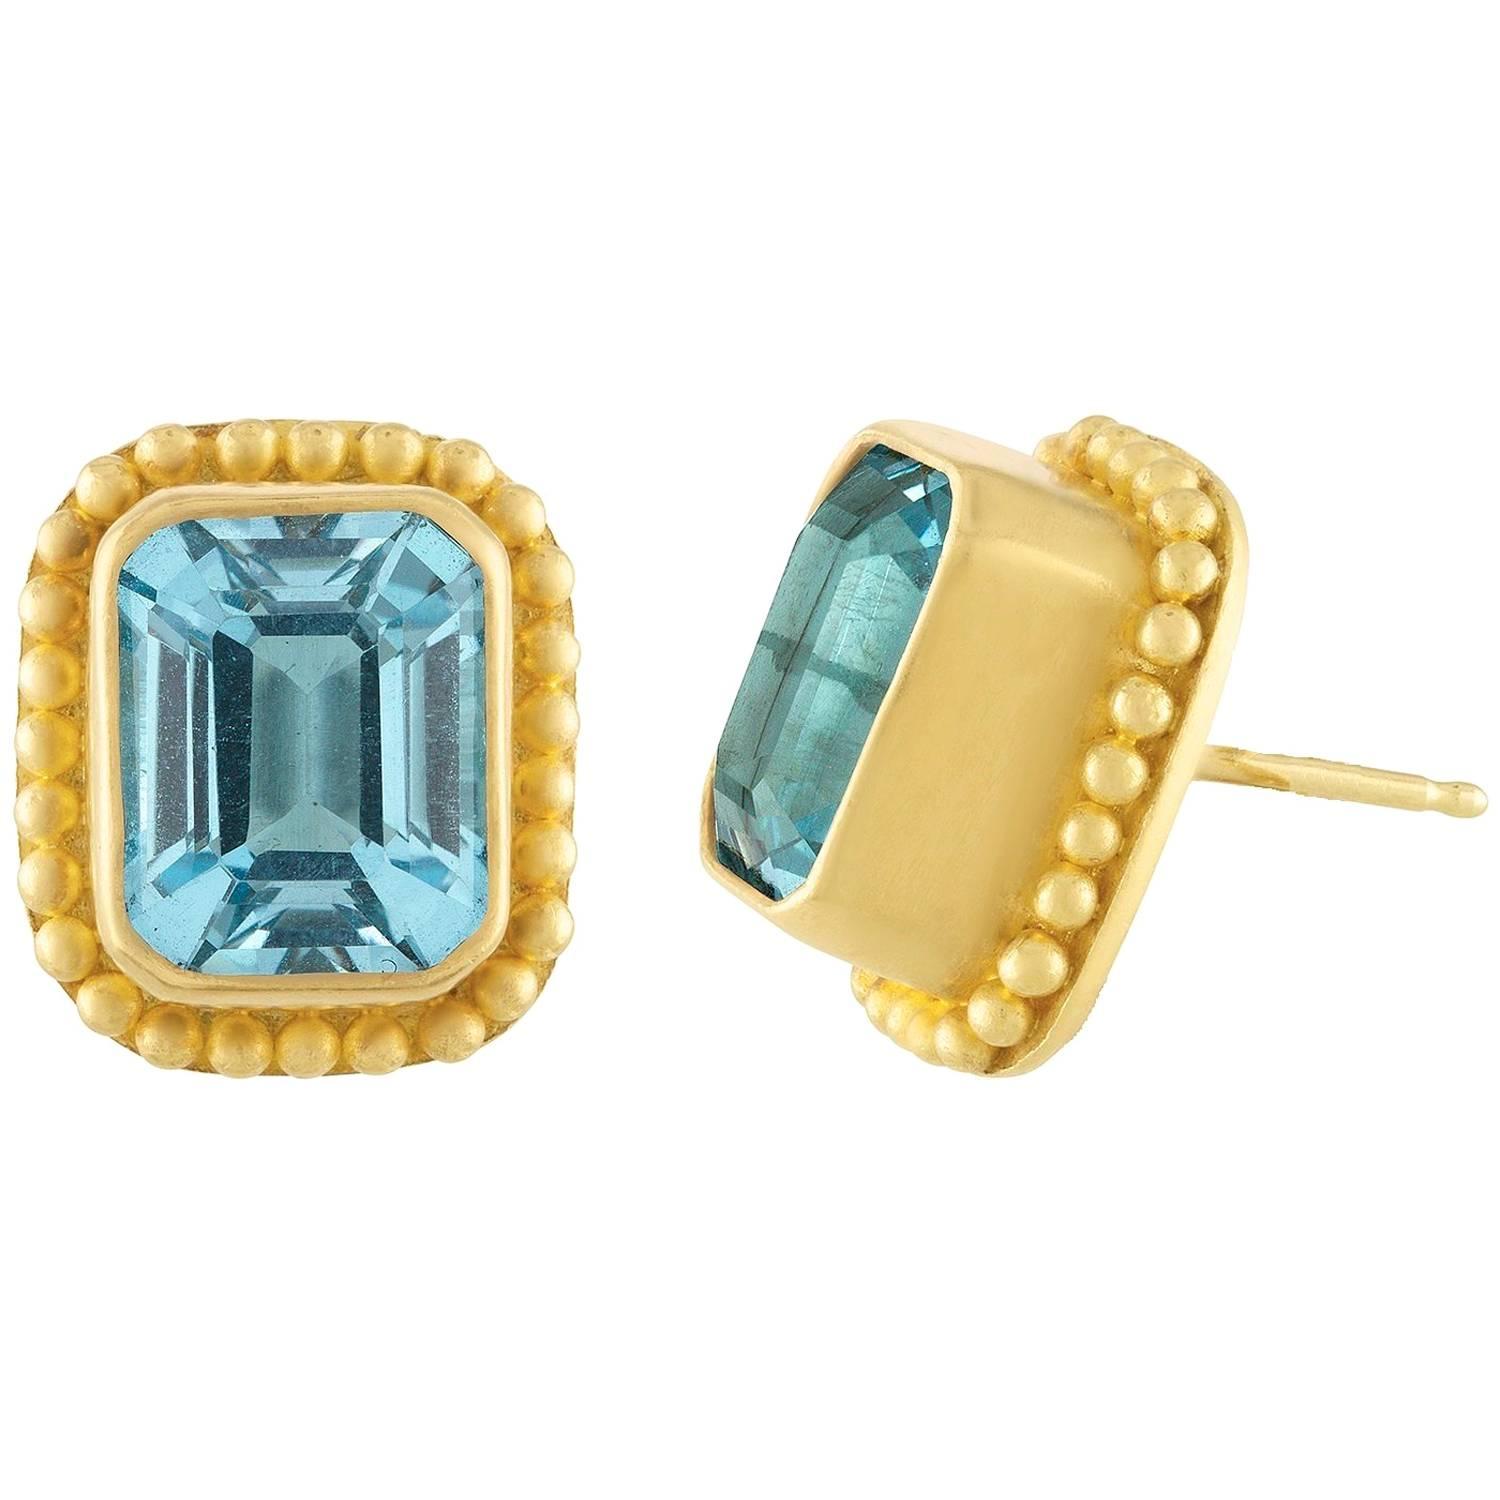 Reinstein Ross Classic 11.00 Carat Blue Topaz and Apricot Gold Stud Earrings For Sale